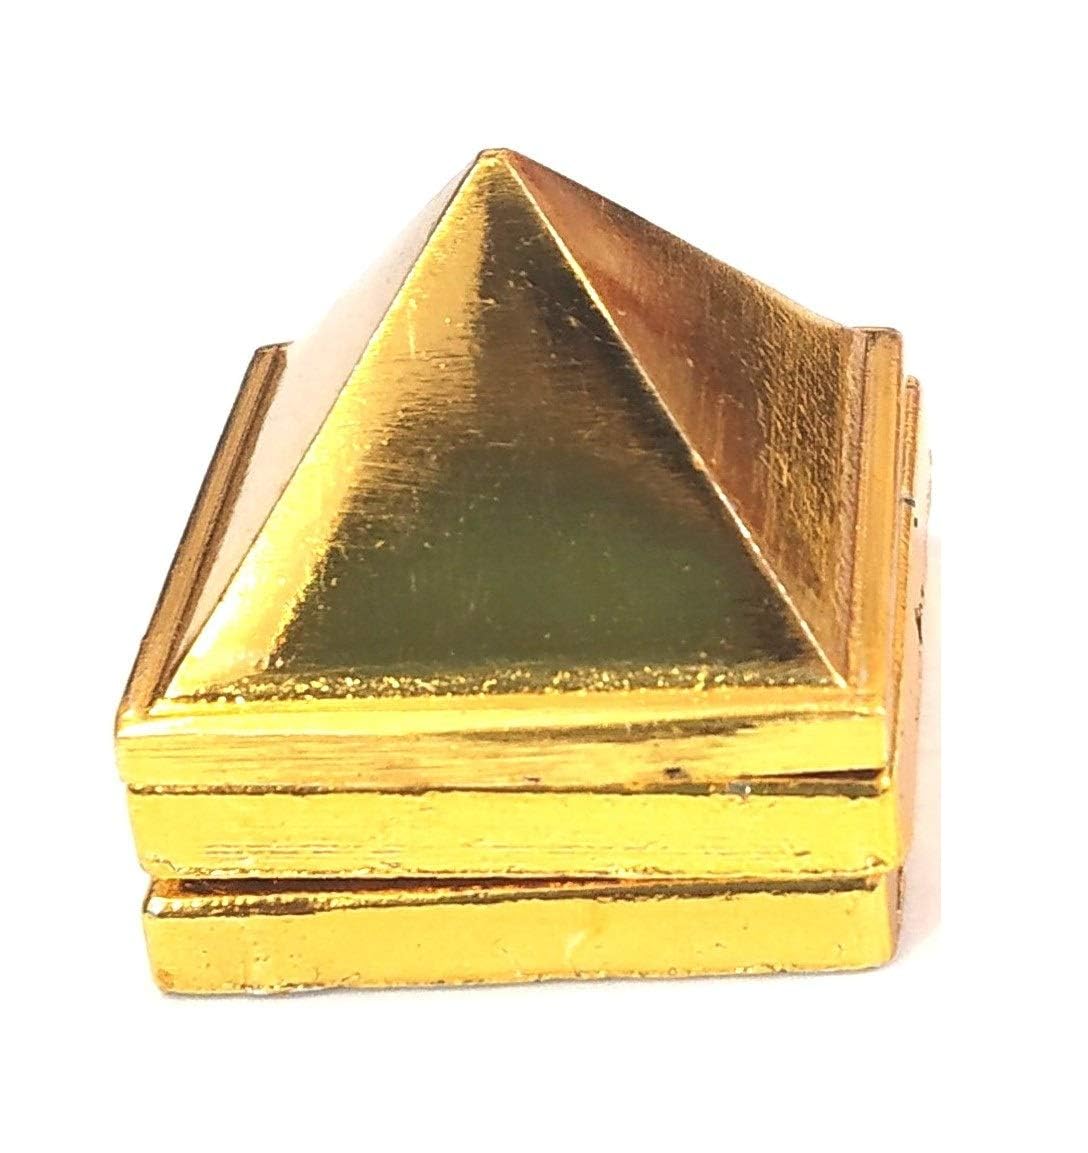 Pujahome Vastu Brass Pyramid That Spreads Positive Vibes, 3 Layer Metal Pyramid 2 inch for Home & Office